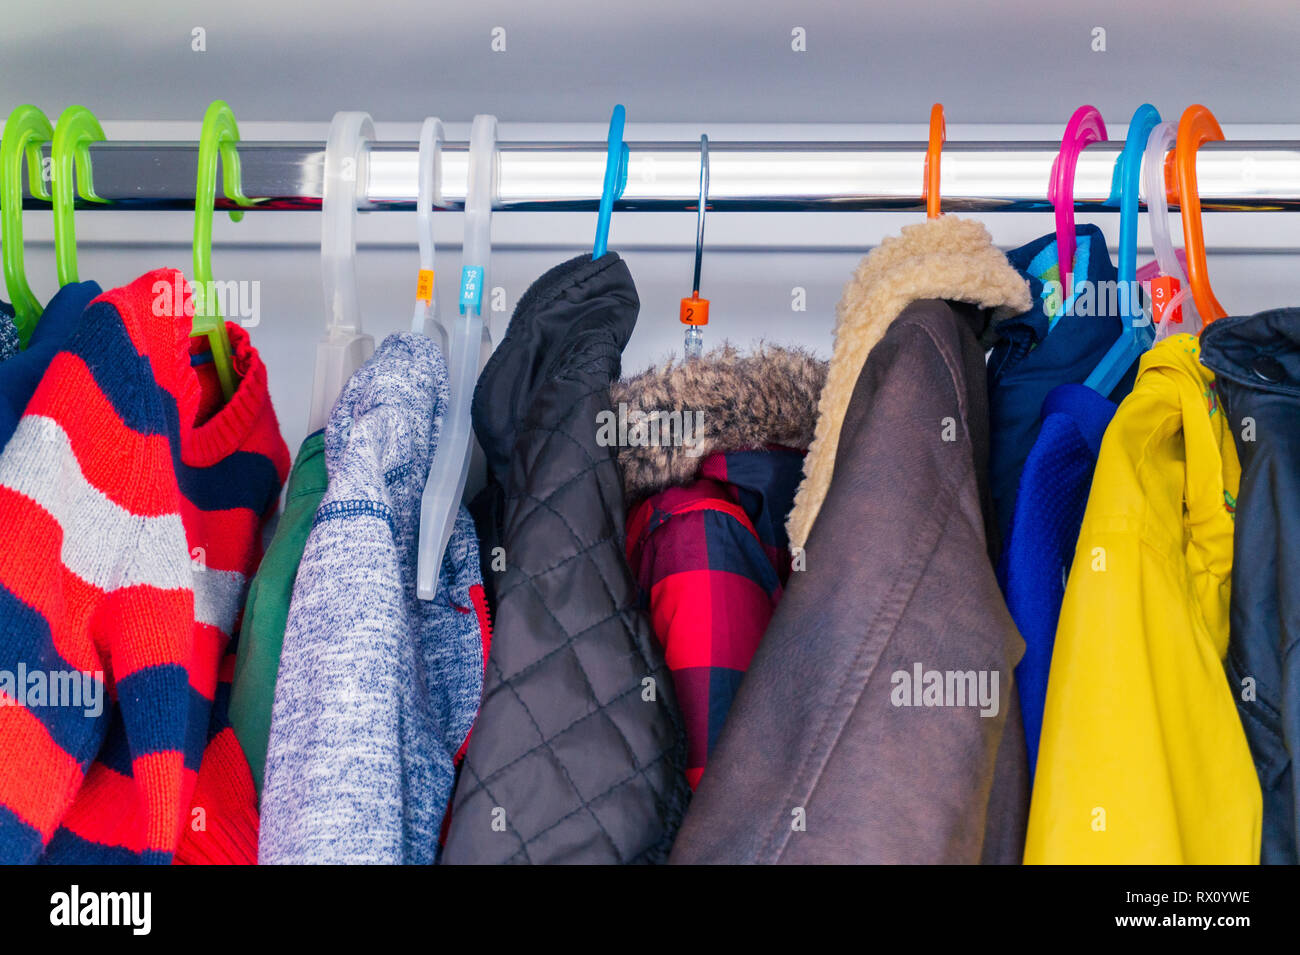 Little boy's child size jackets, coats and sweaters hanging in a kid's closet with colorful hangers. Preparing for winter with warm clothing for kids. Stock Photo